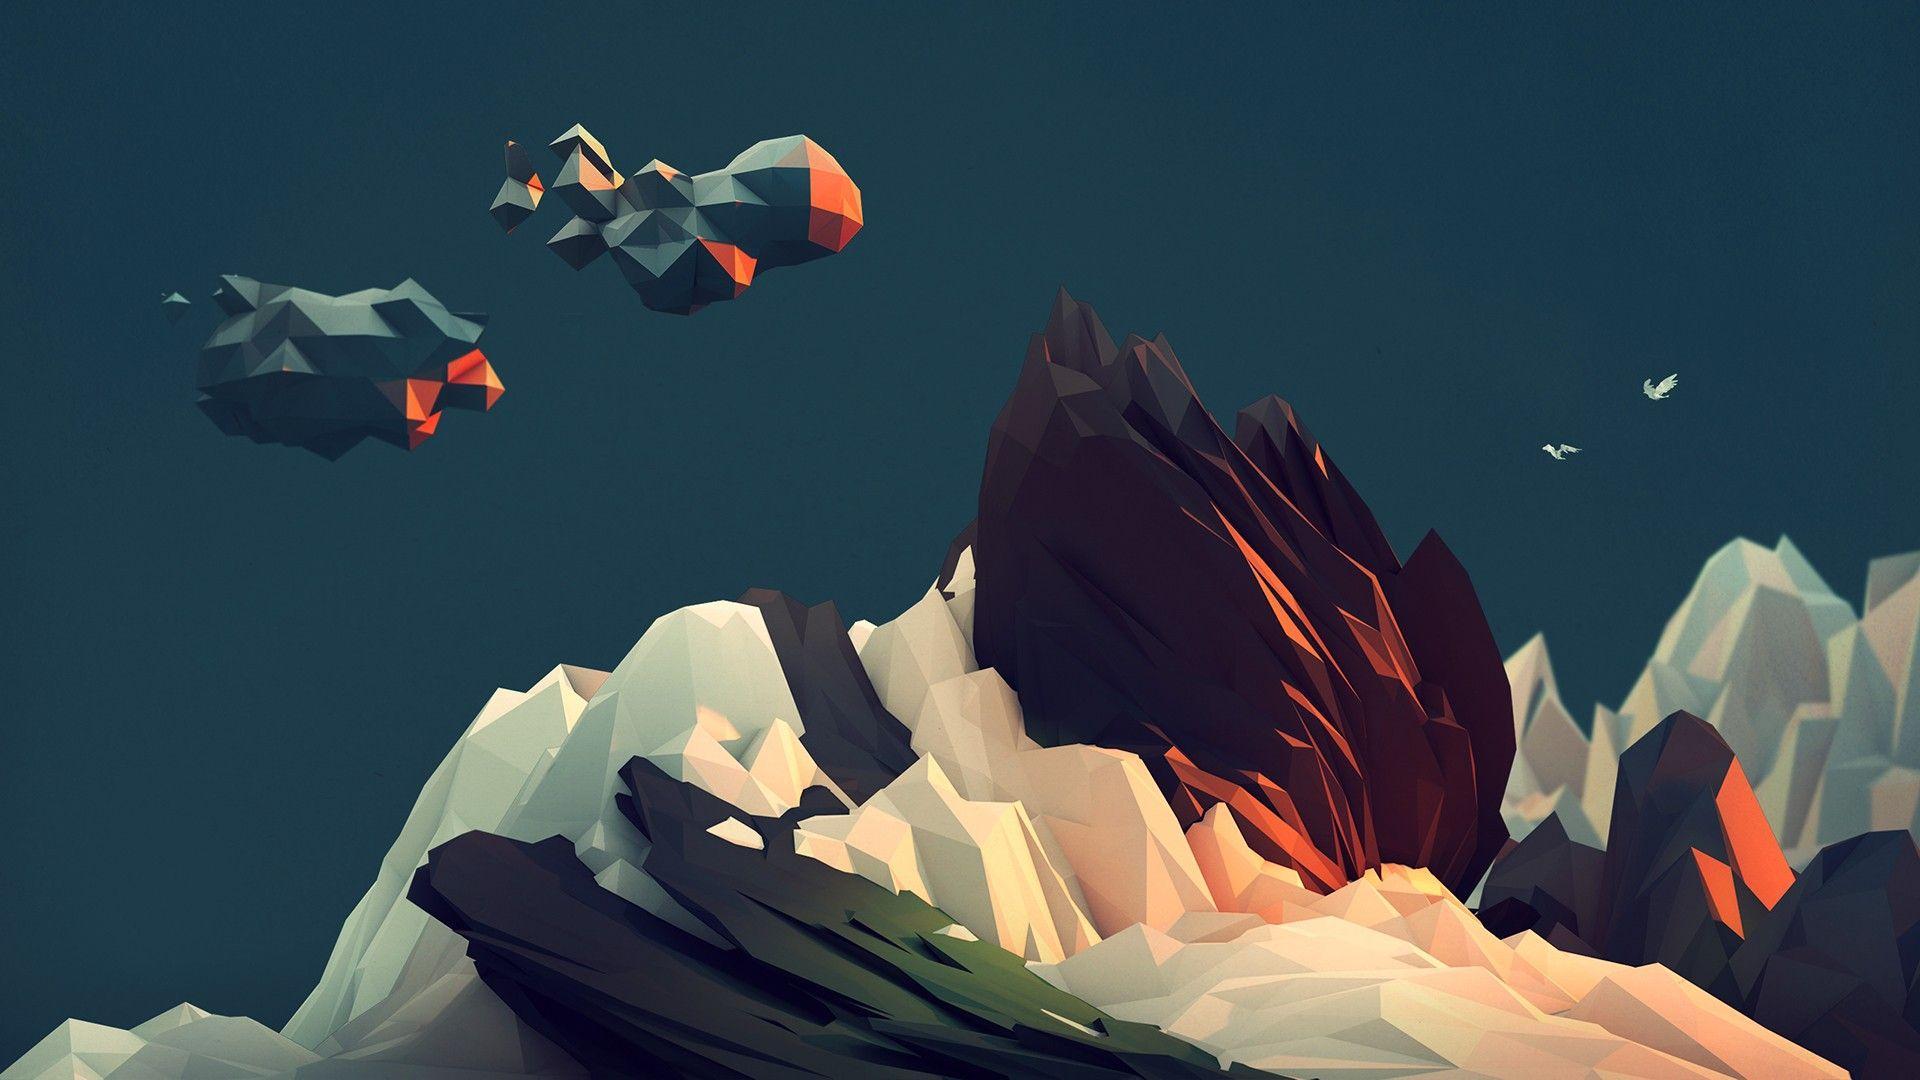 High Def Collection: 44 Full HD Low Poly Wallpaper (In Full HD, PAI)